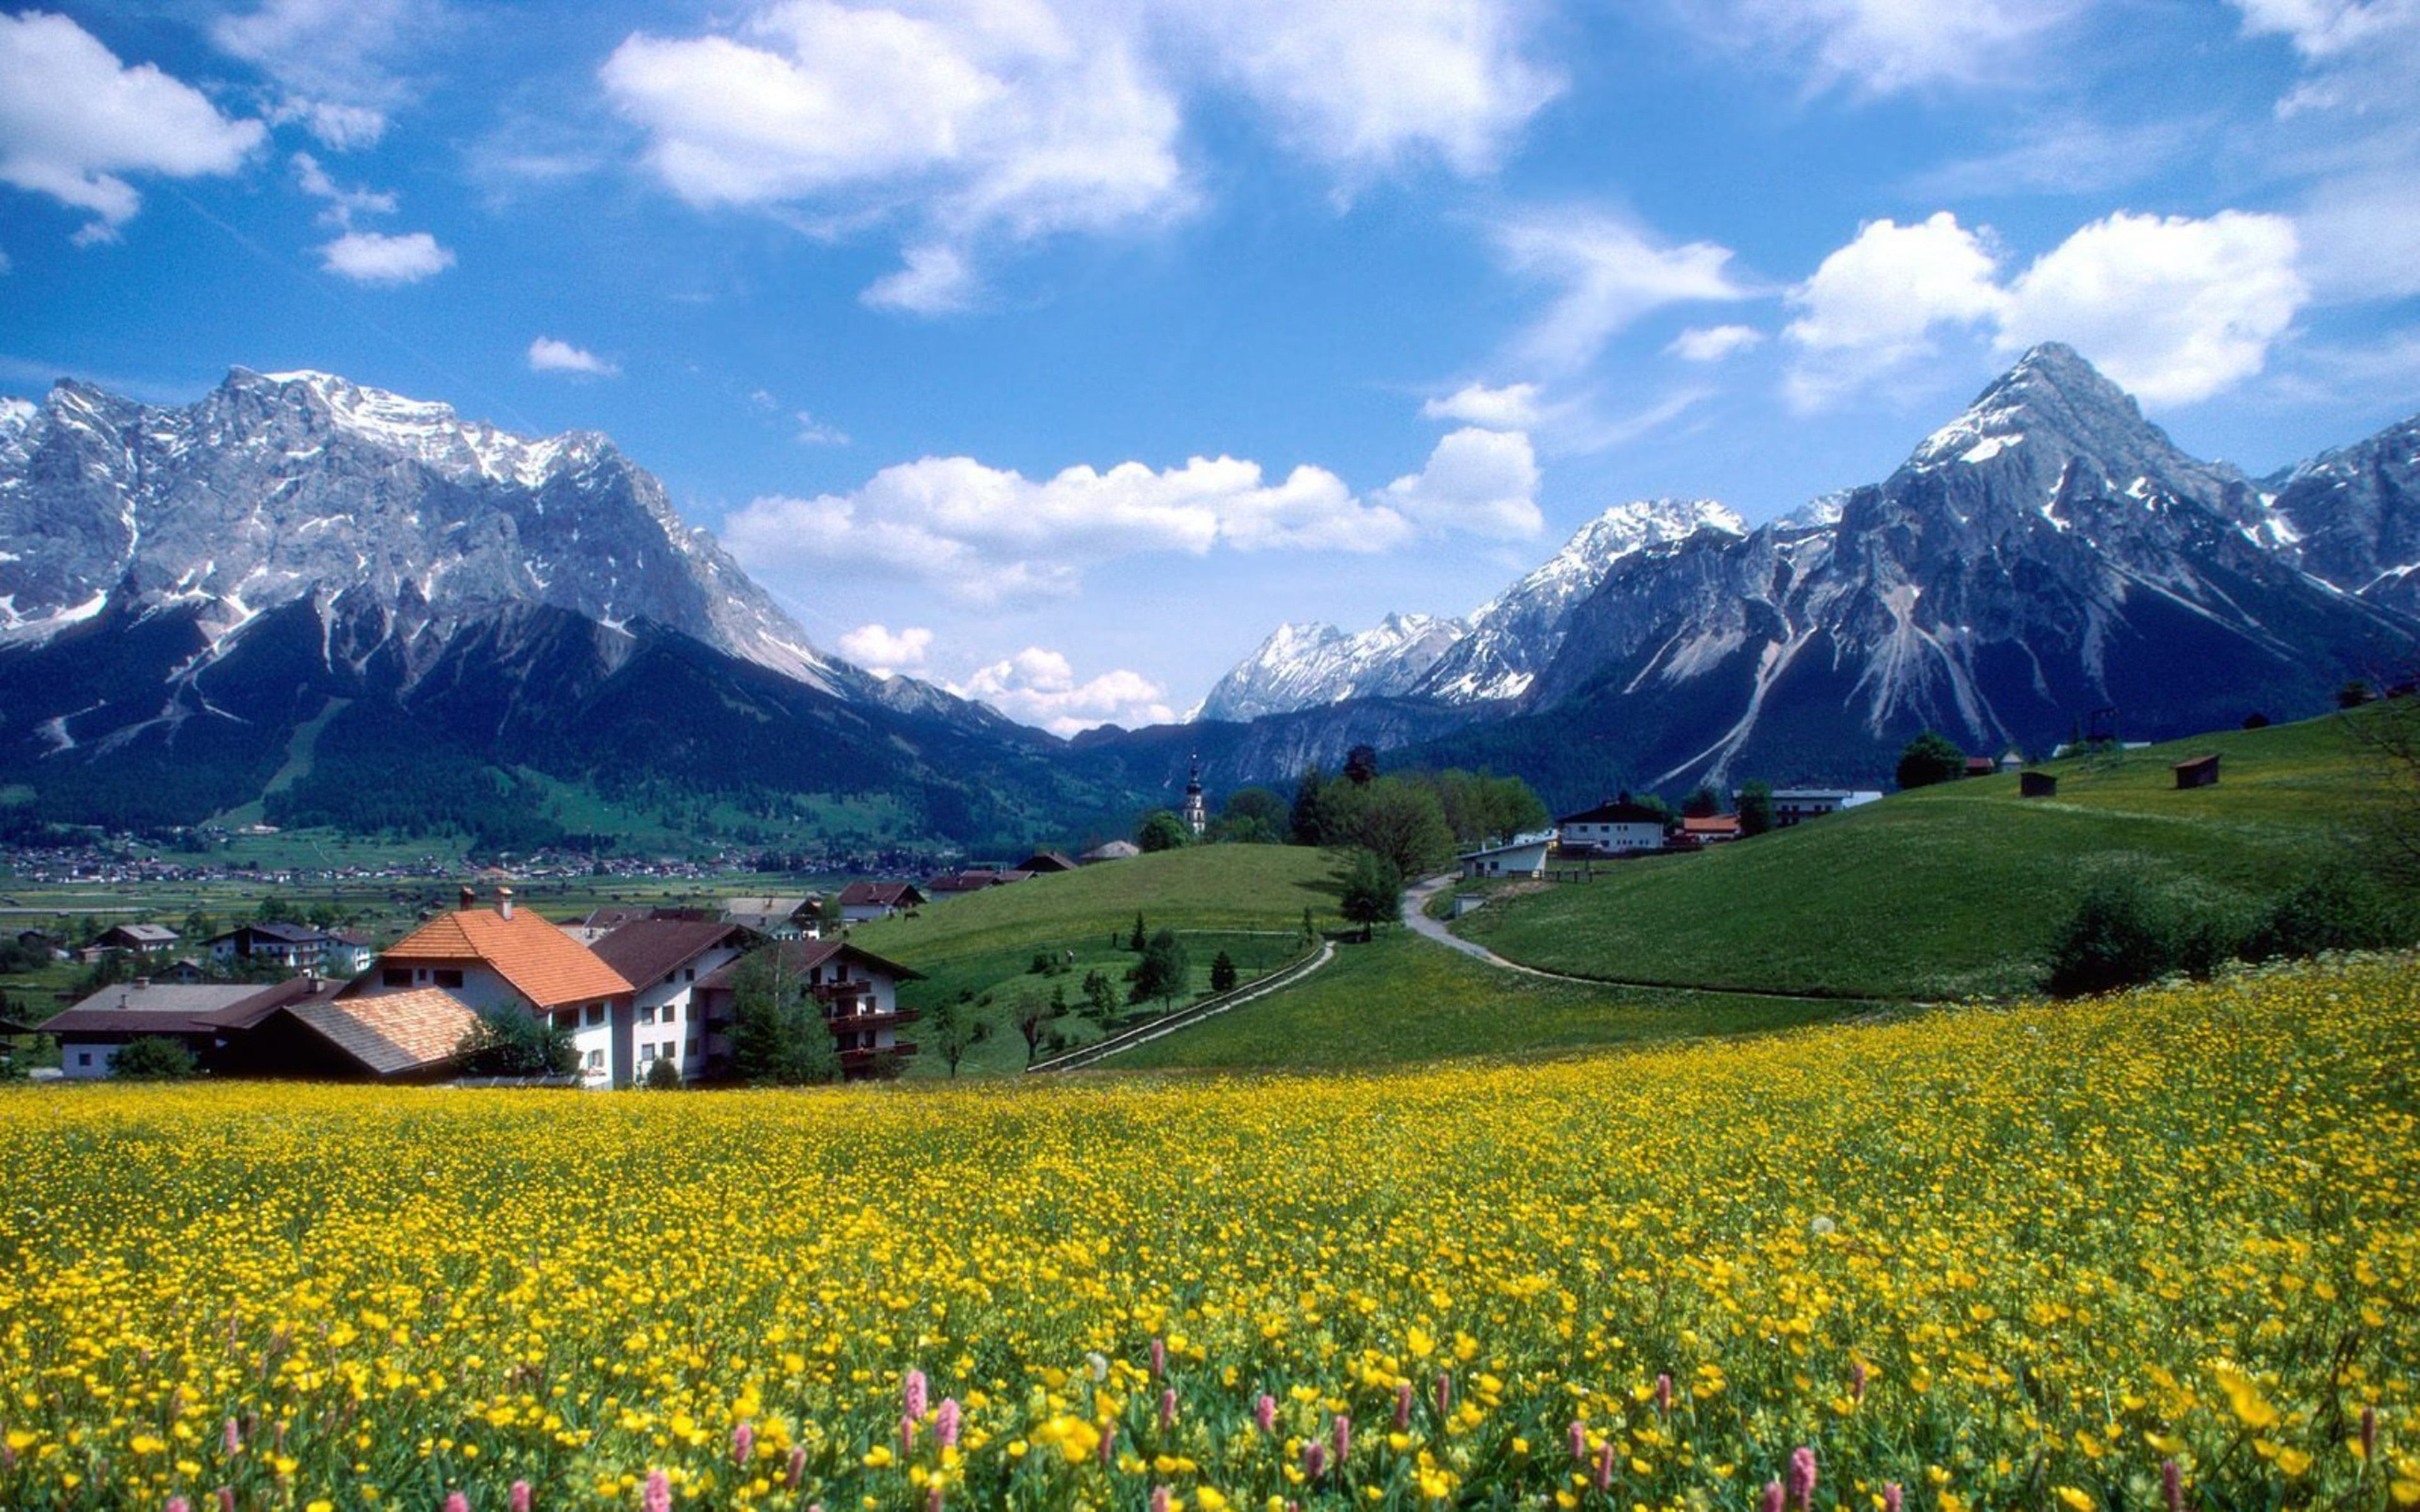 Wallpaper / village, bavaria, hd, springtime, spring, meadow, beauty in nature, wallpaper, flowering plant, snowcapped mountain, idyllic, agriculture, flowers, snow free download